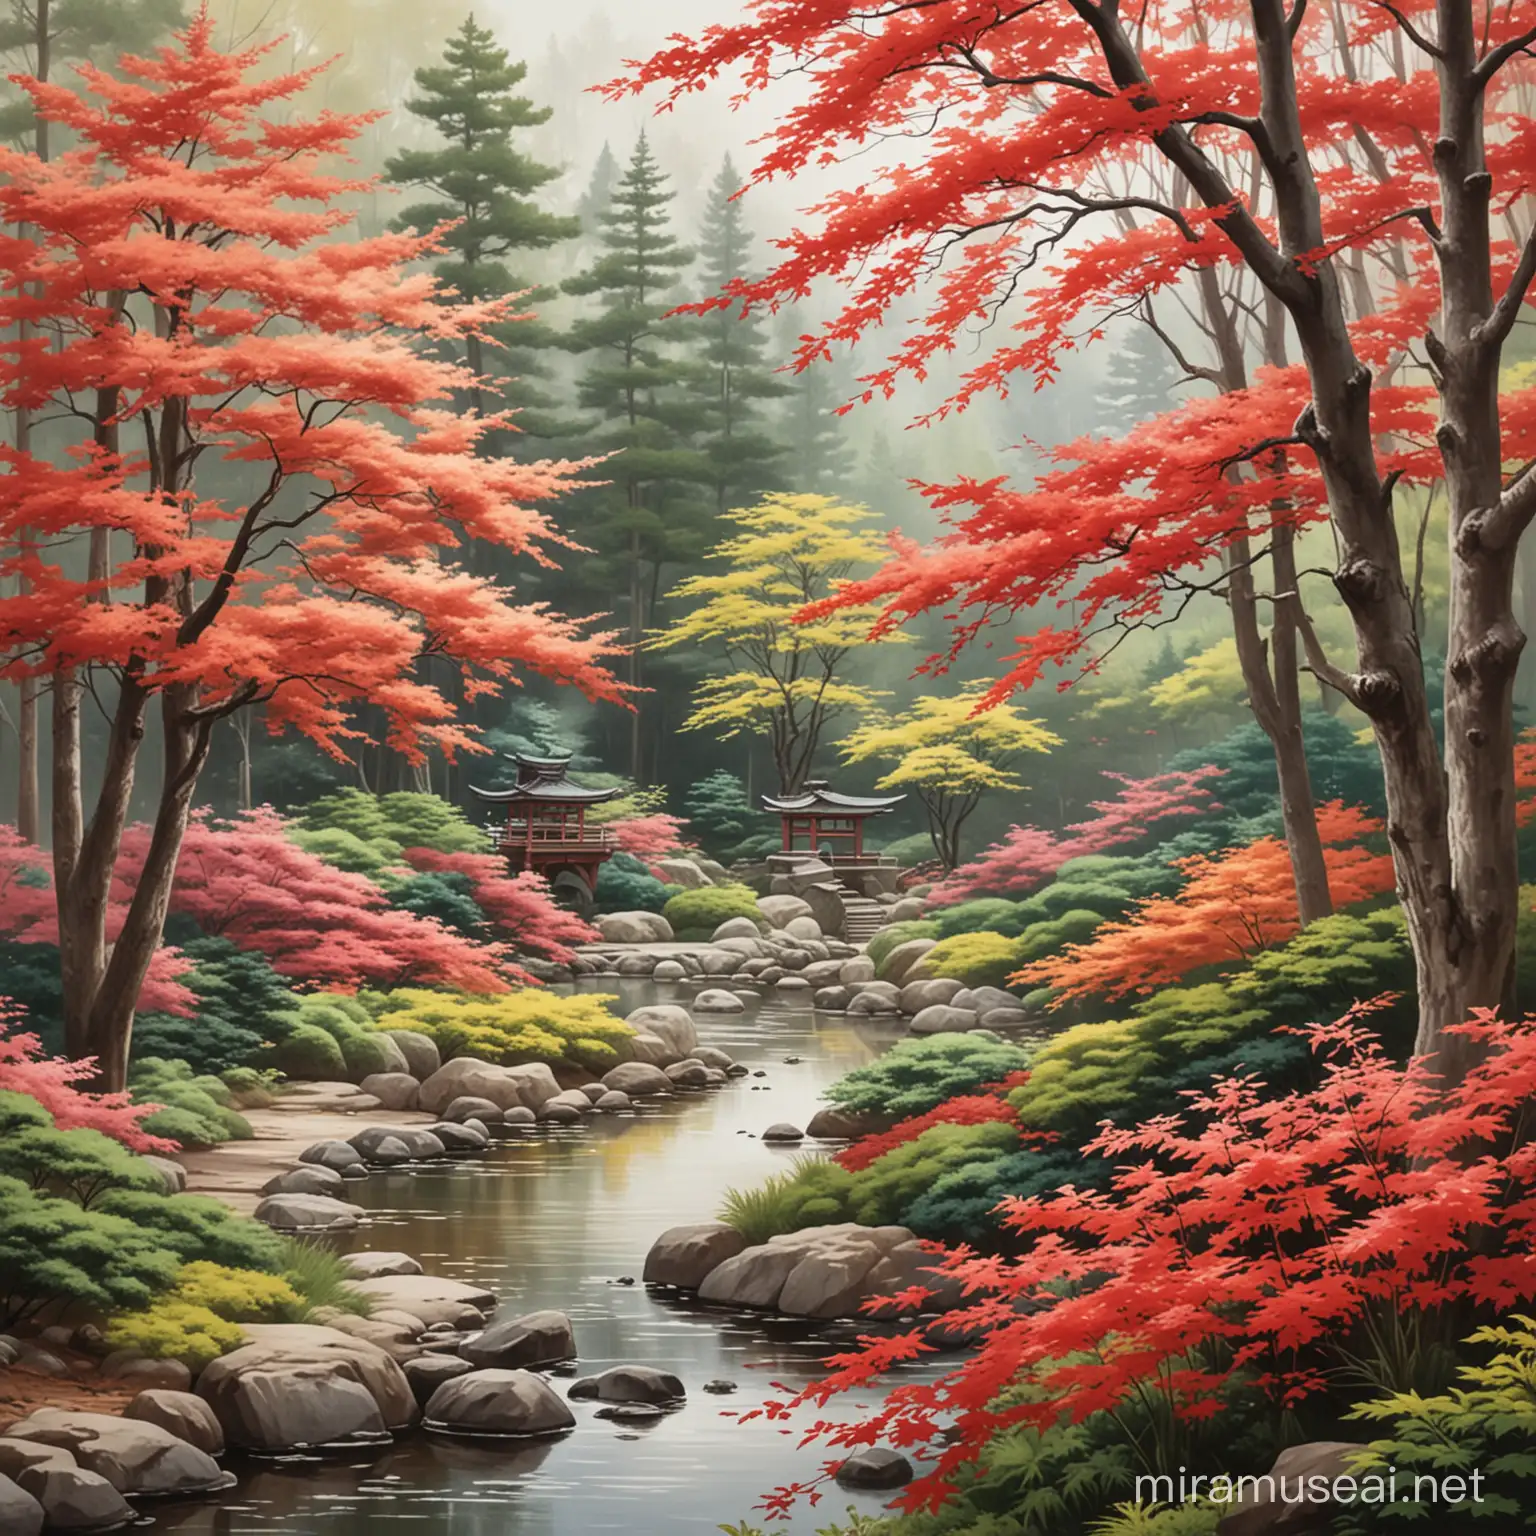 create a japanese painting of a garden with red maple and limber pine trees and azaleas